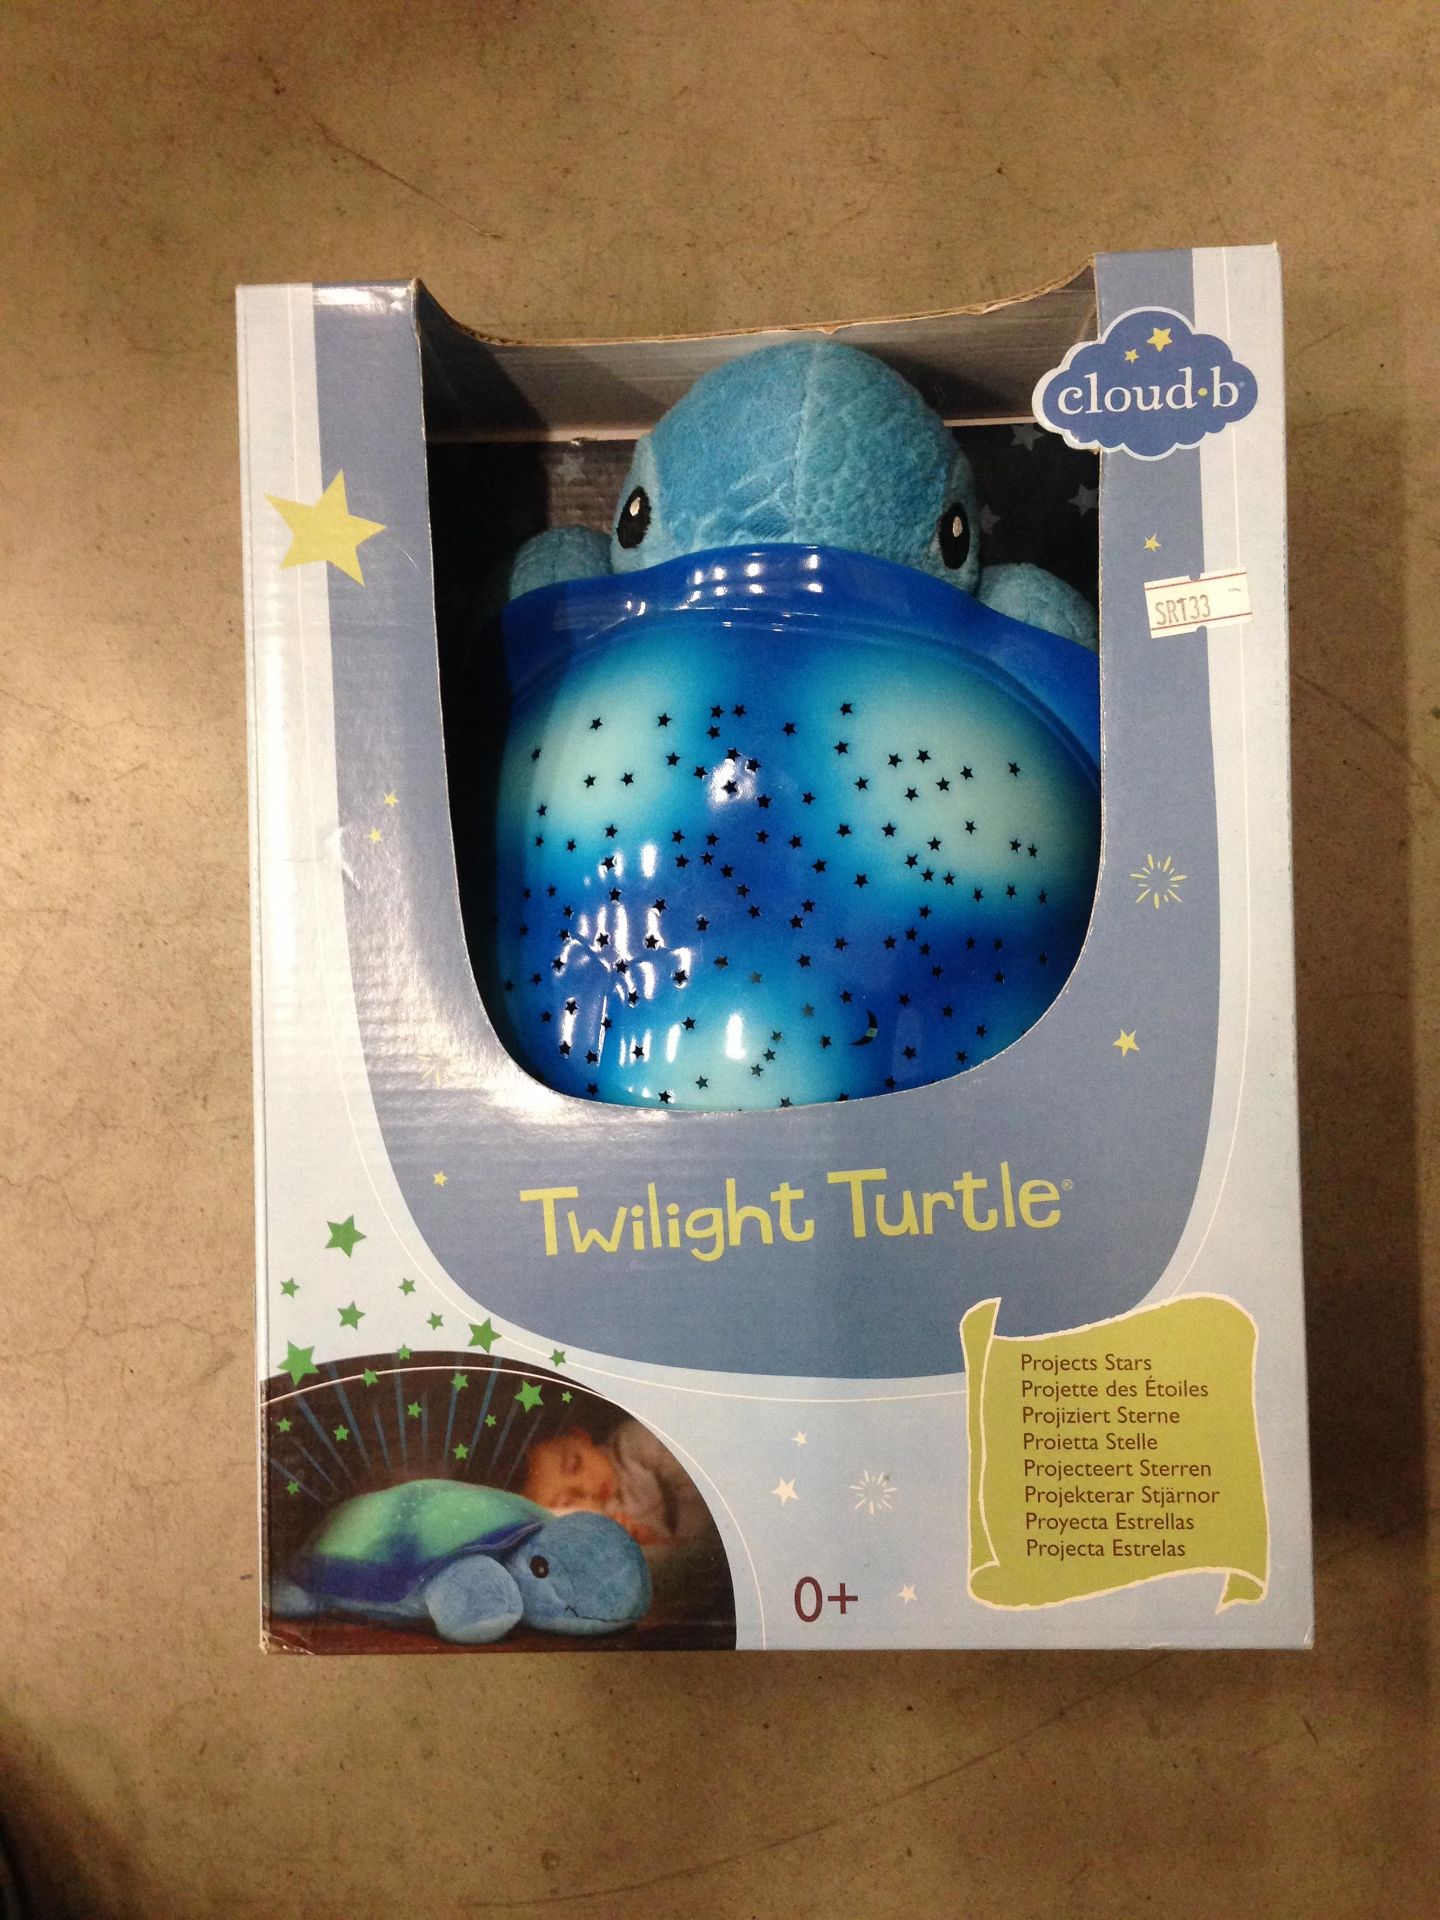 1 Cloud-b Twighlight Turtle - new boxed